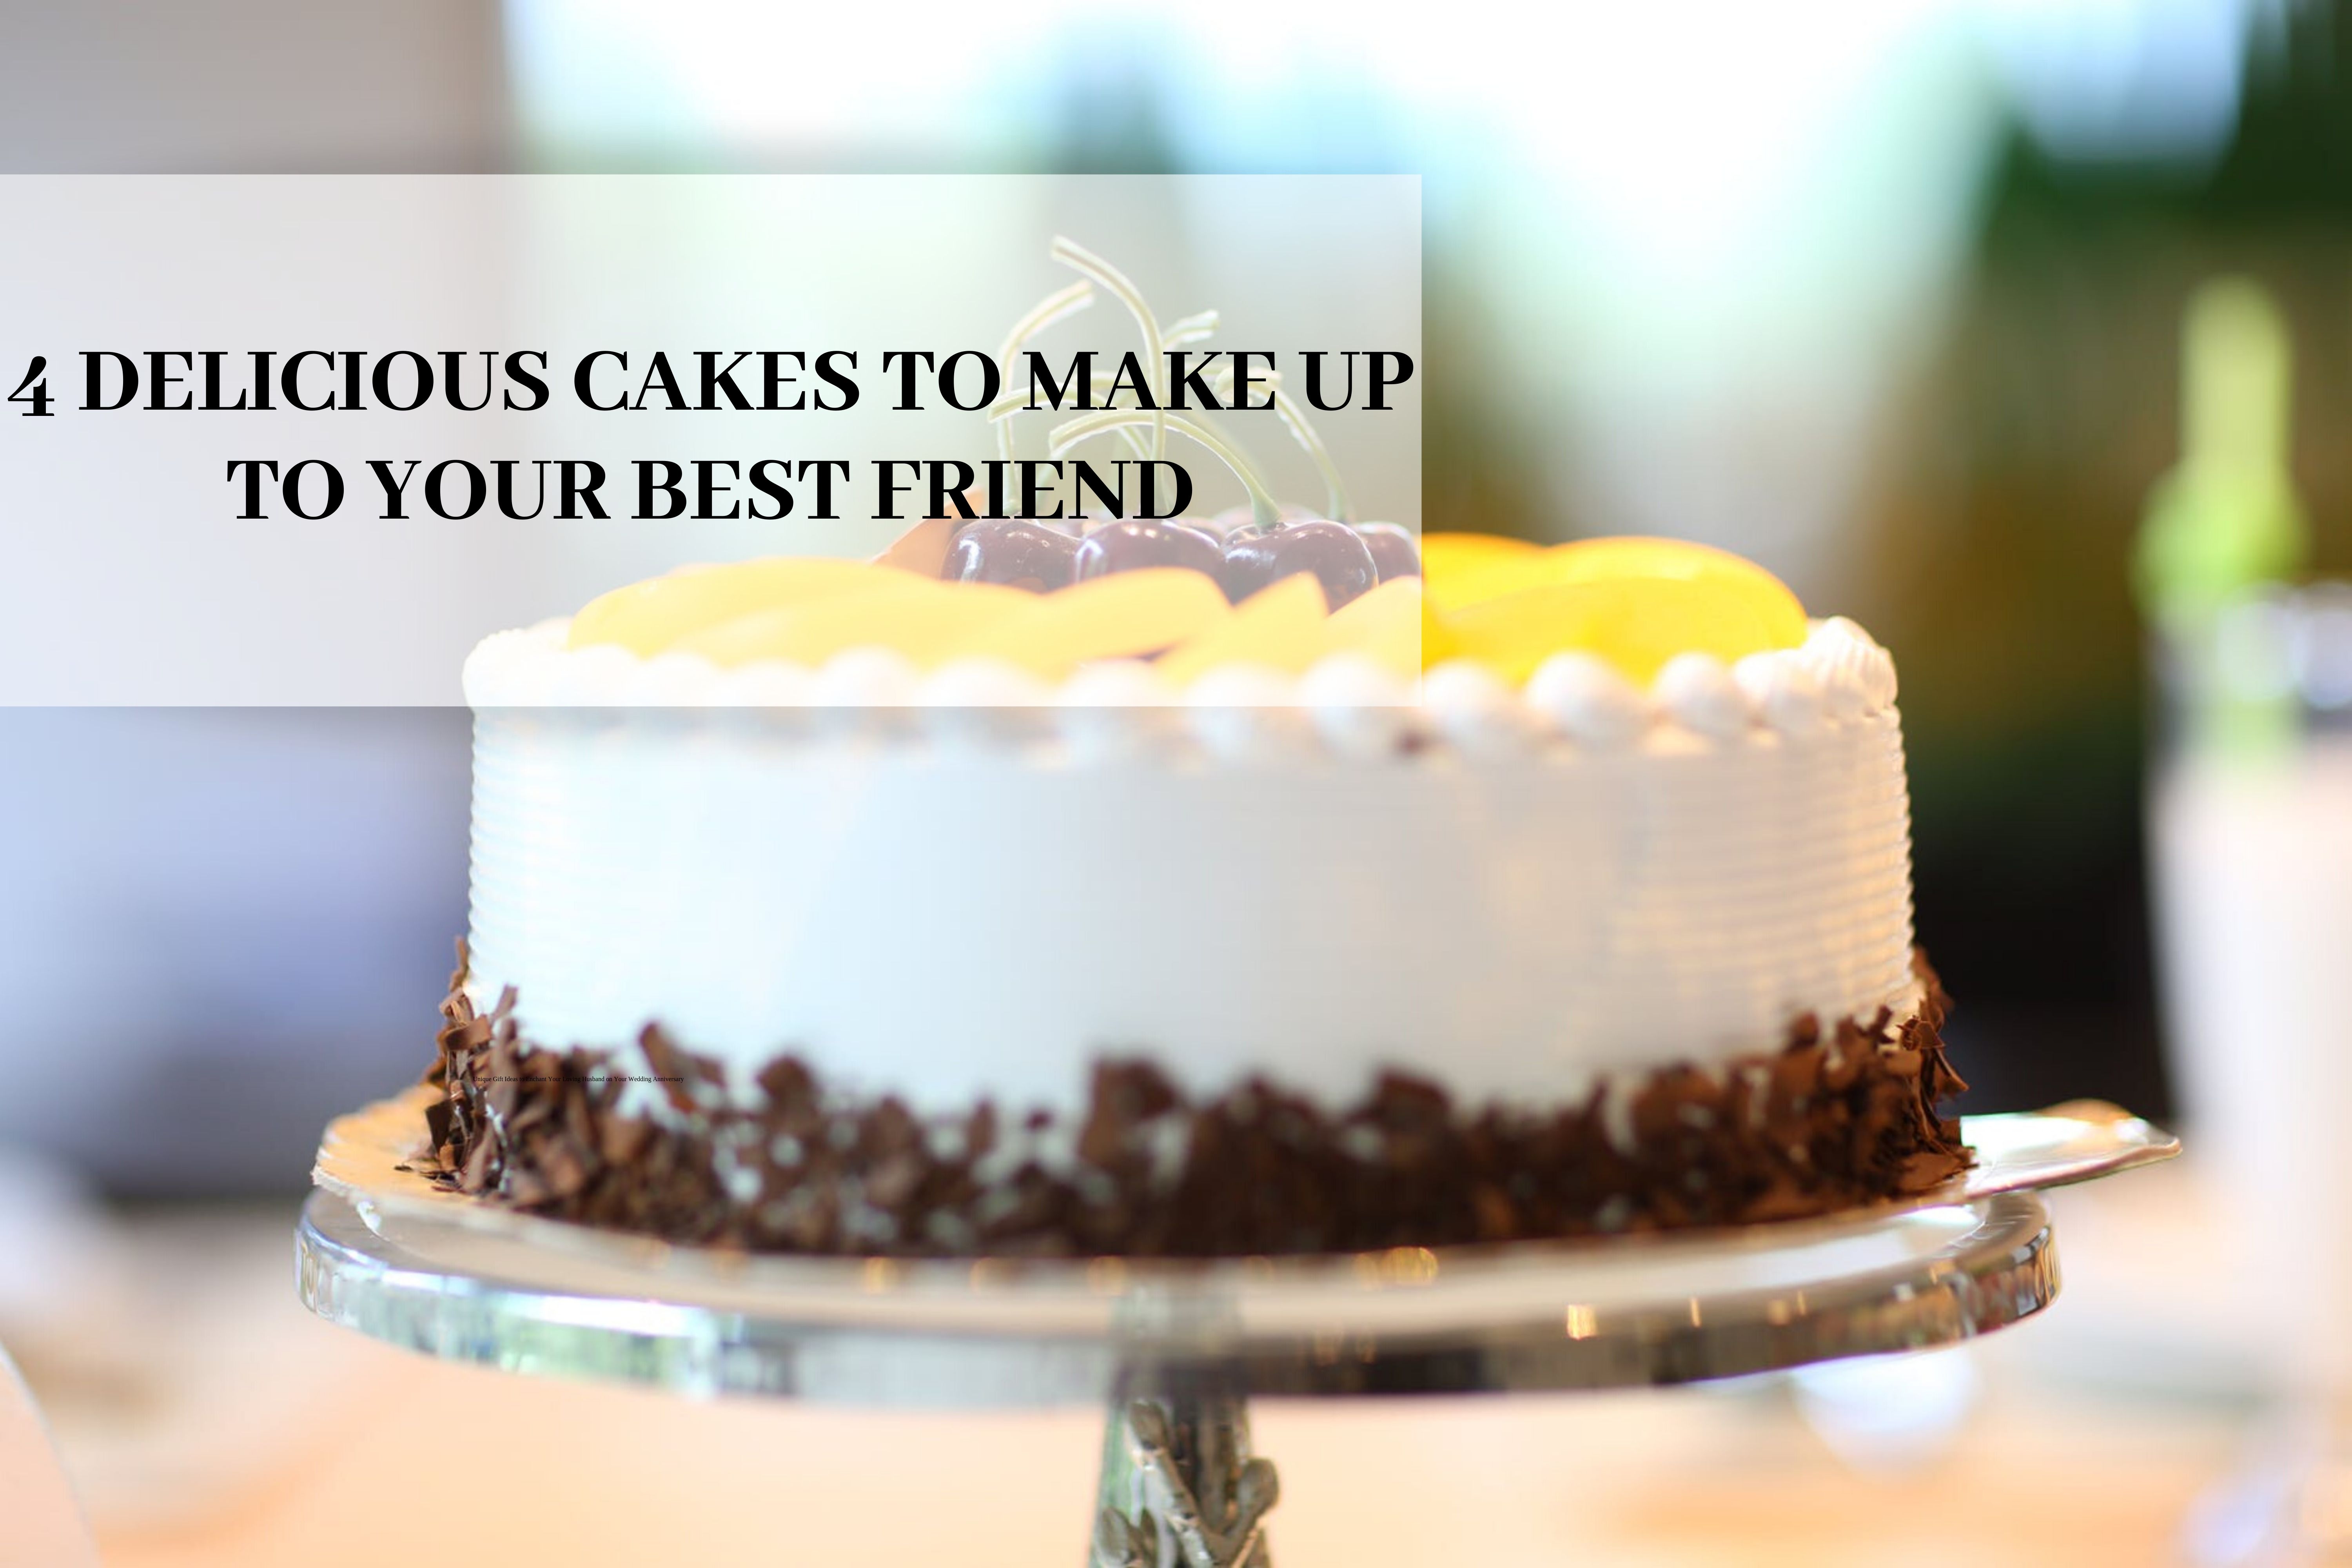 4 Delicious Cakes To Make Up To Your Best Friend